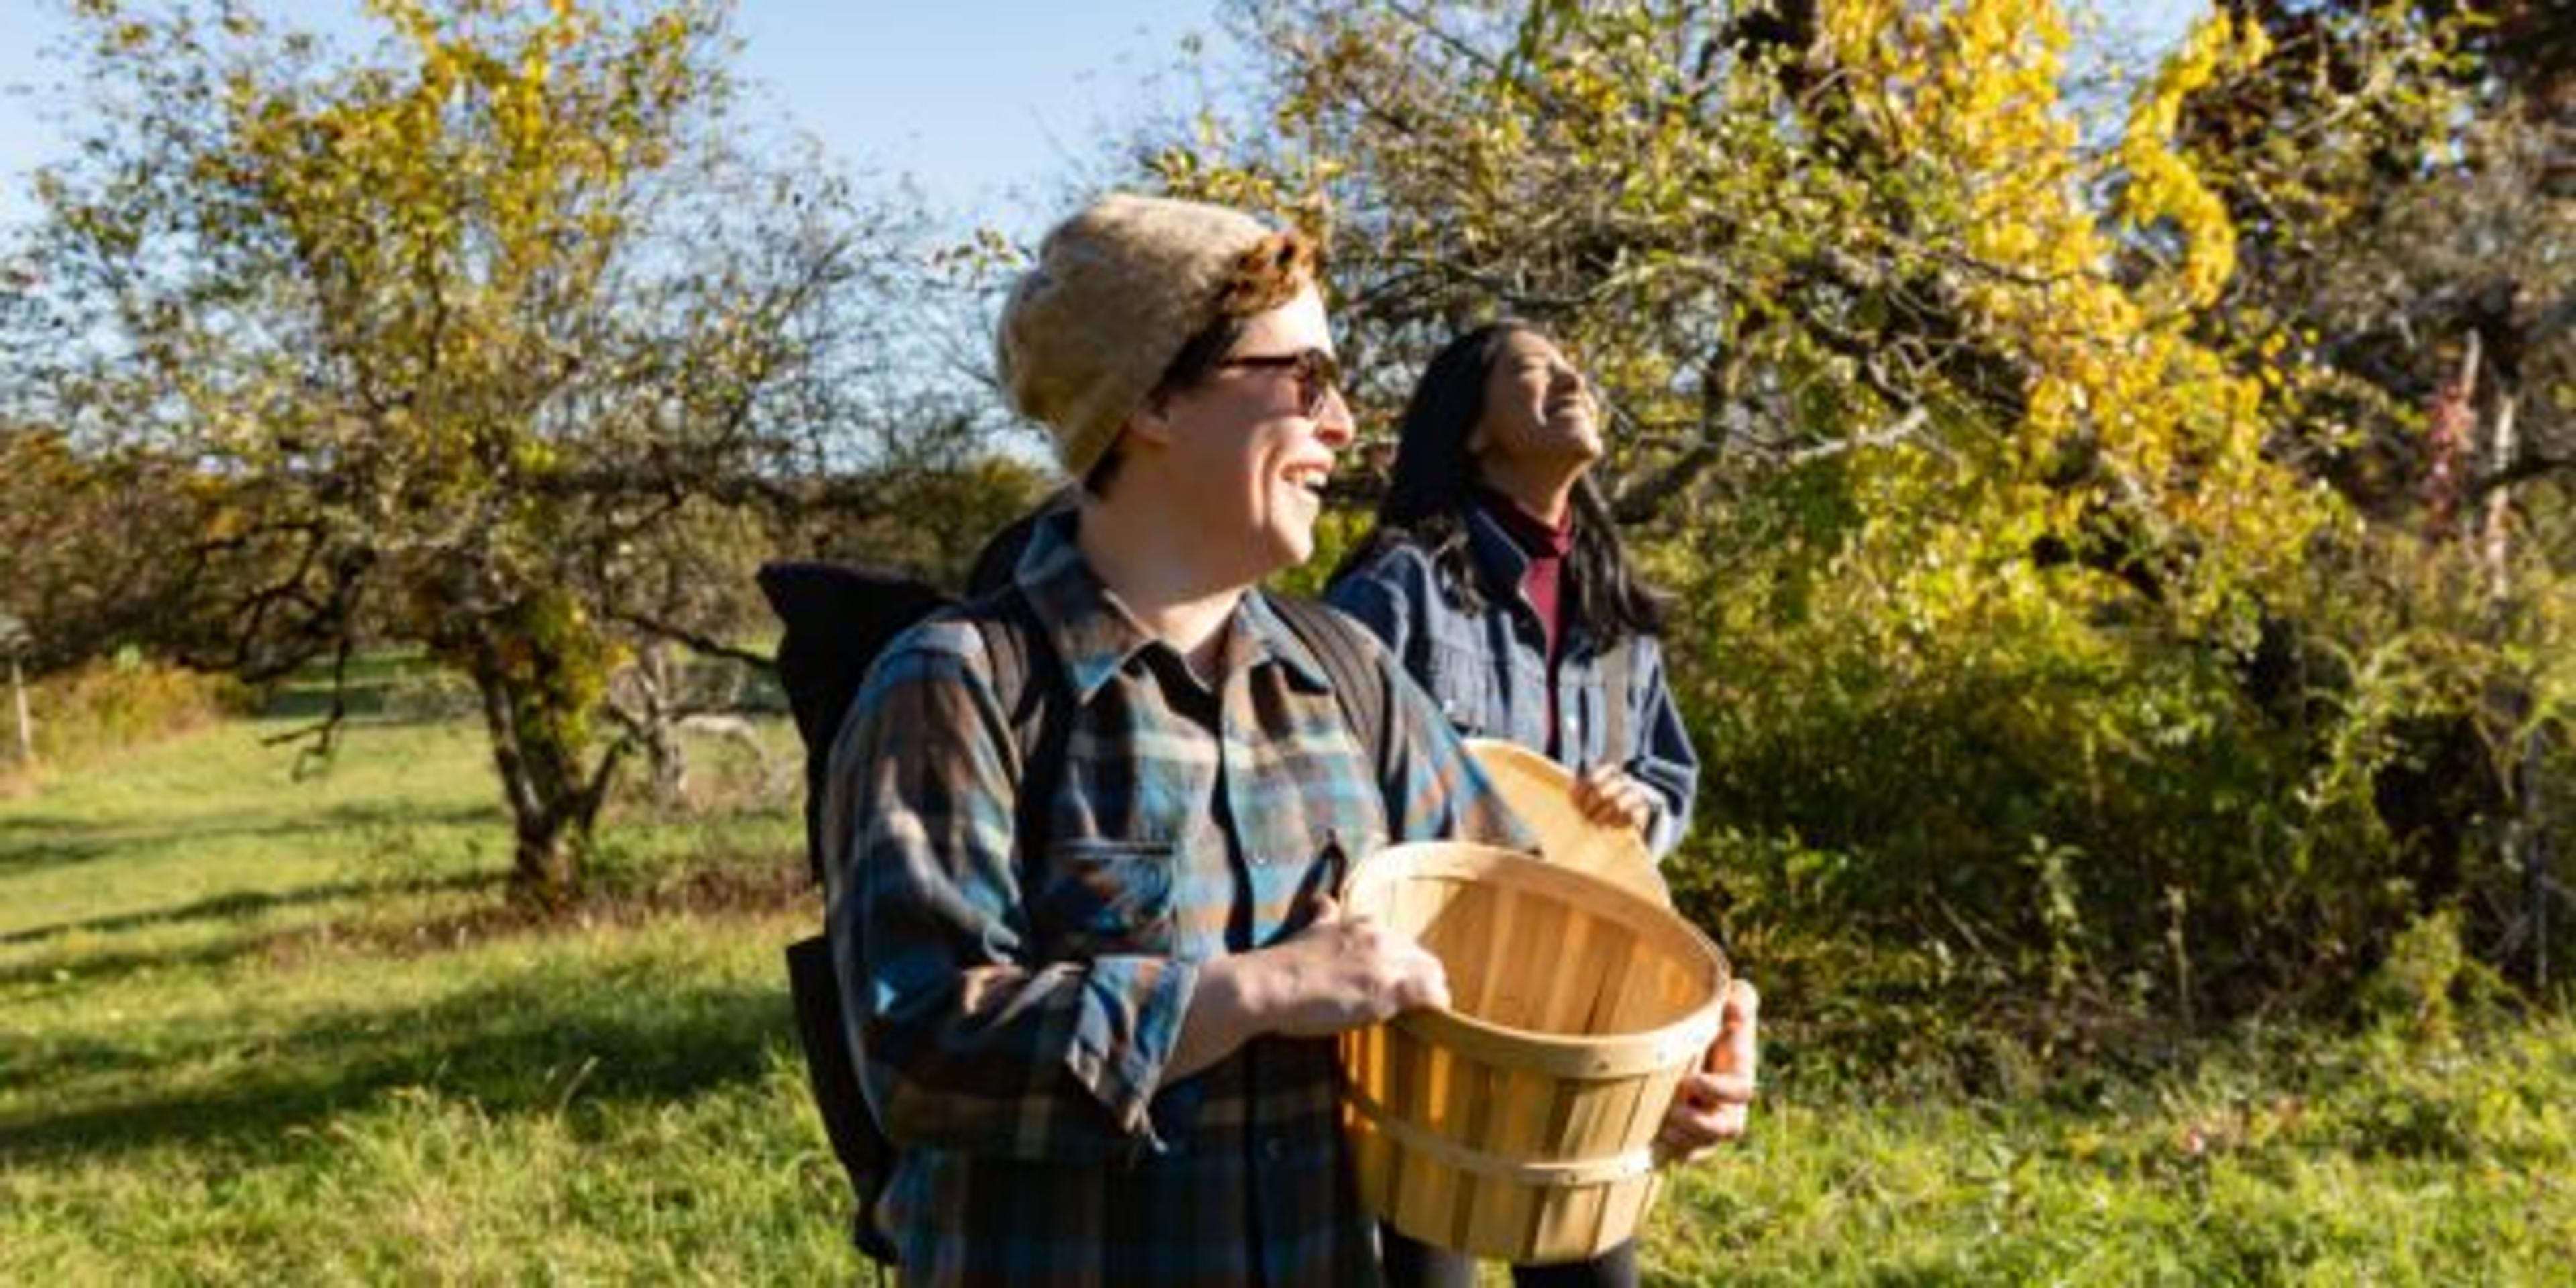 Michigan Bucket List: Apple Orchards to Explore This Fall 